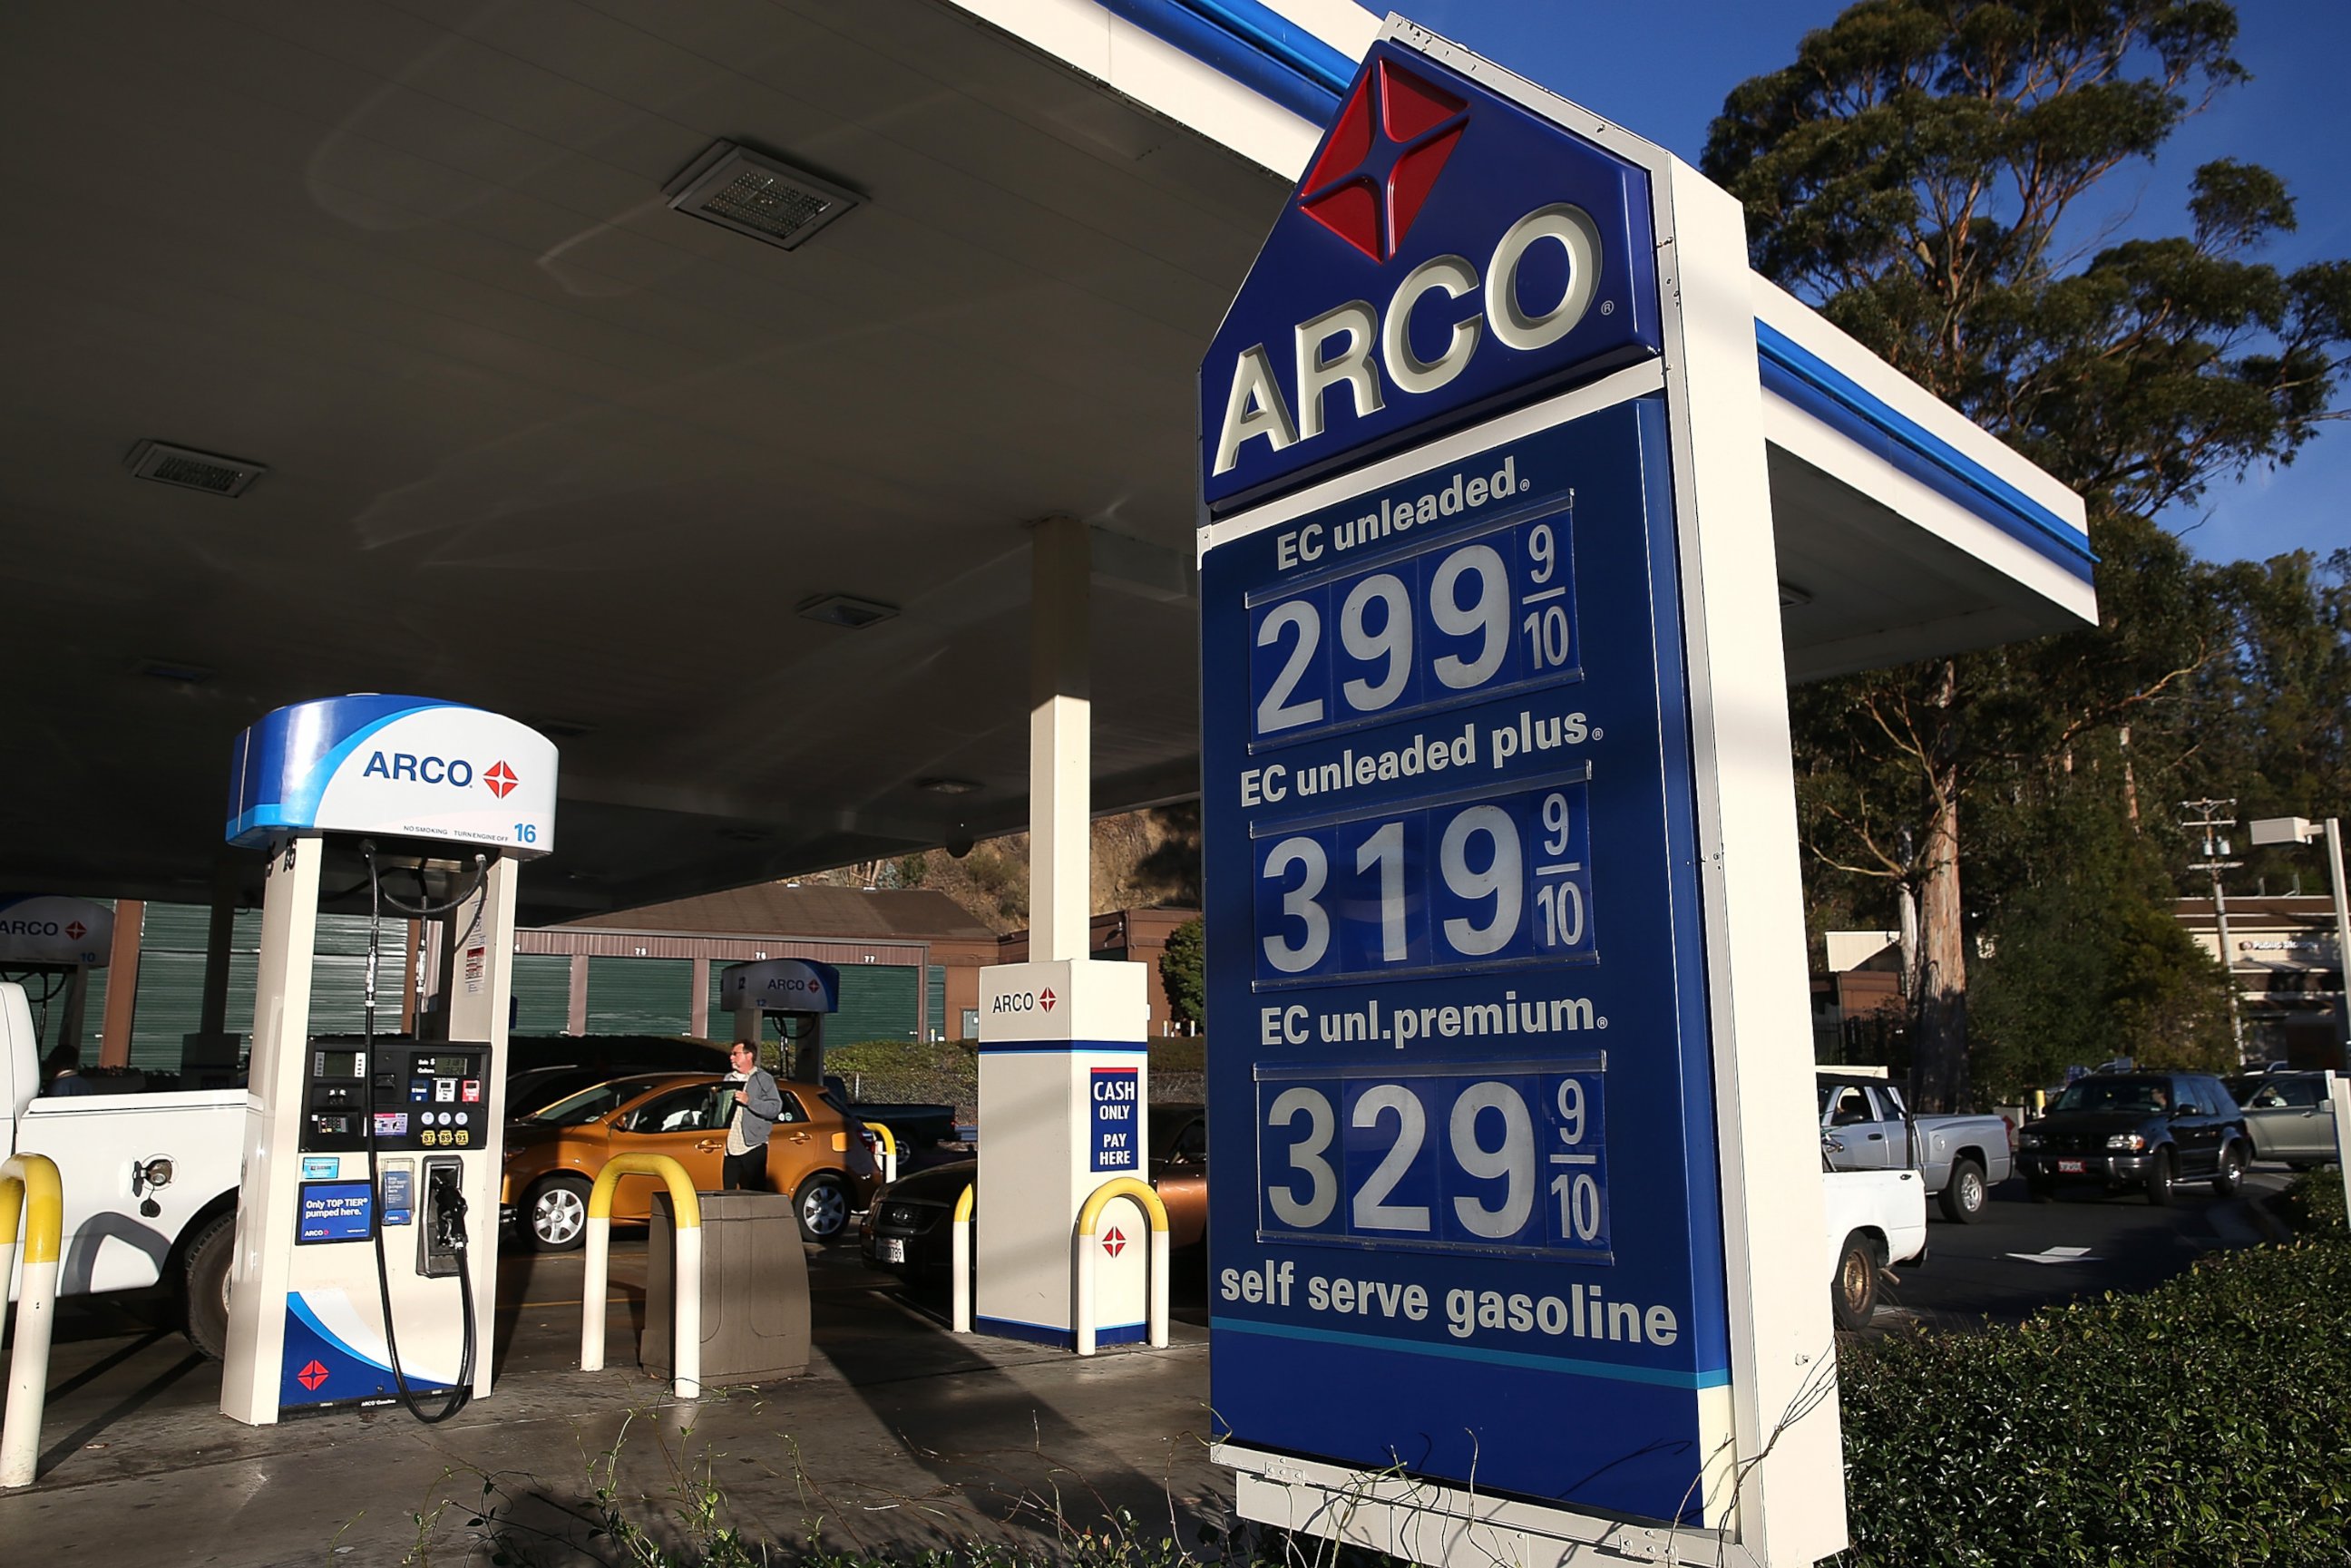 PHOTO: Gas prices are displayed at an Arco gas station on Oct. 27, 2014 in Mill Valley, Calif.